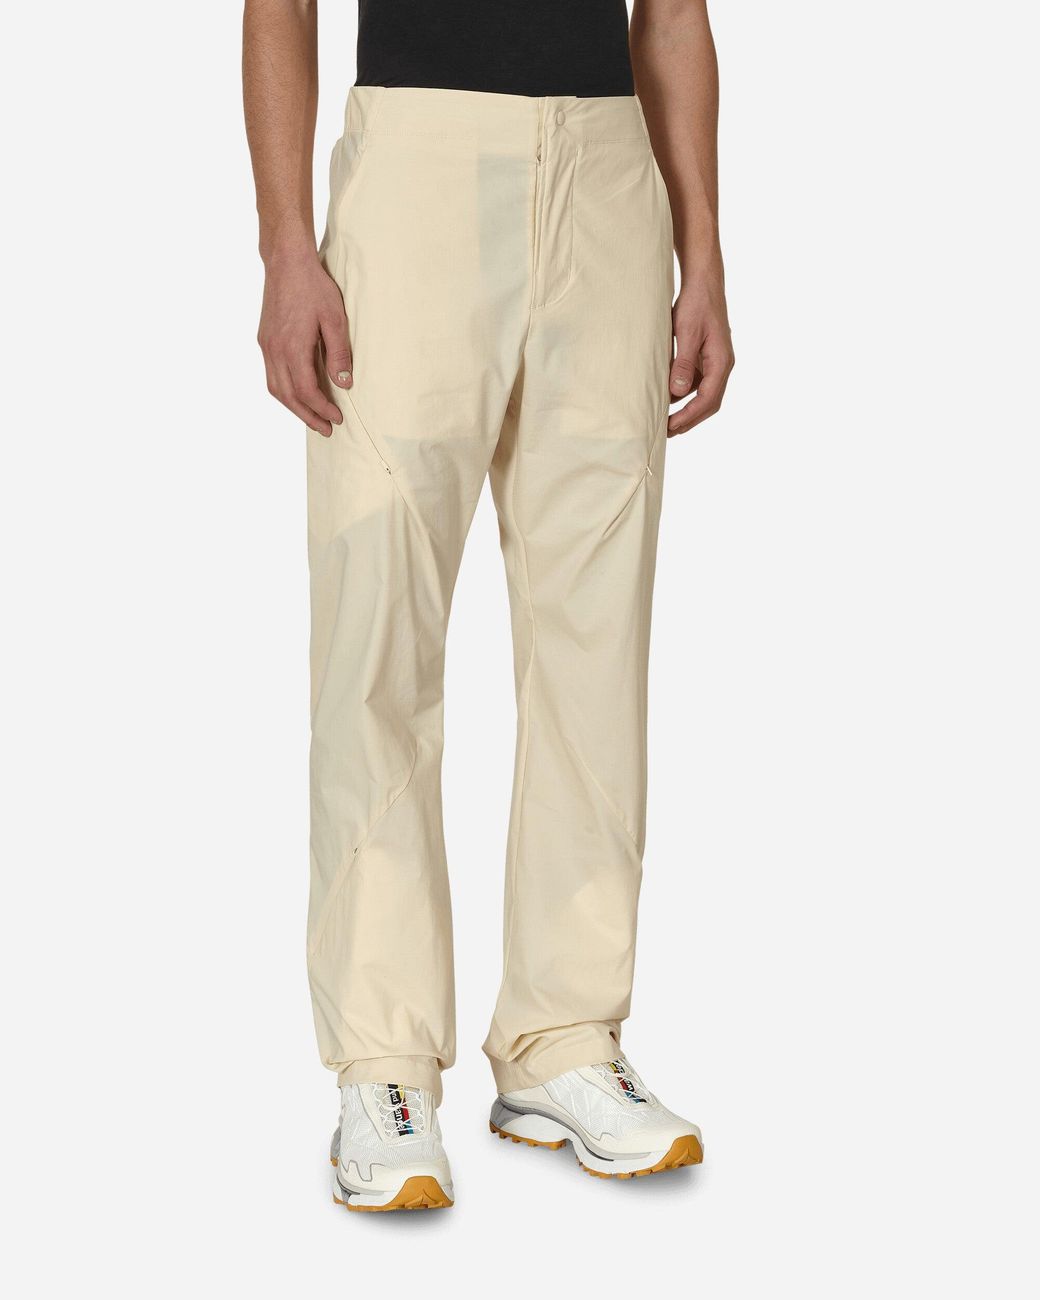 Post Archive Faction PAF 5.0+ Technical Pants Right Ivory in